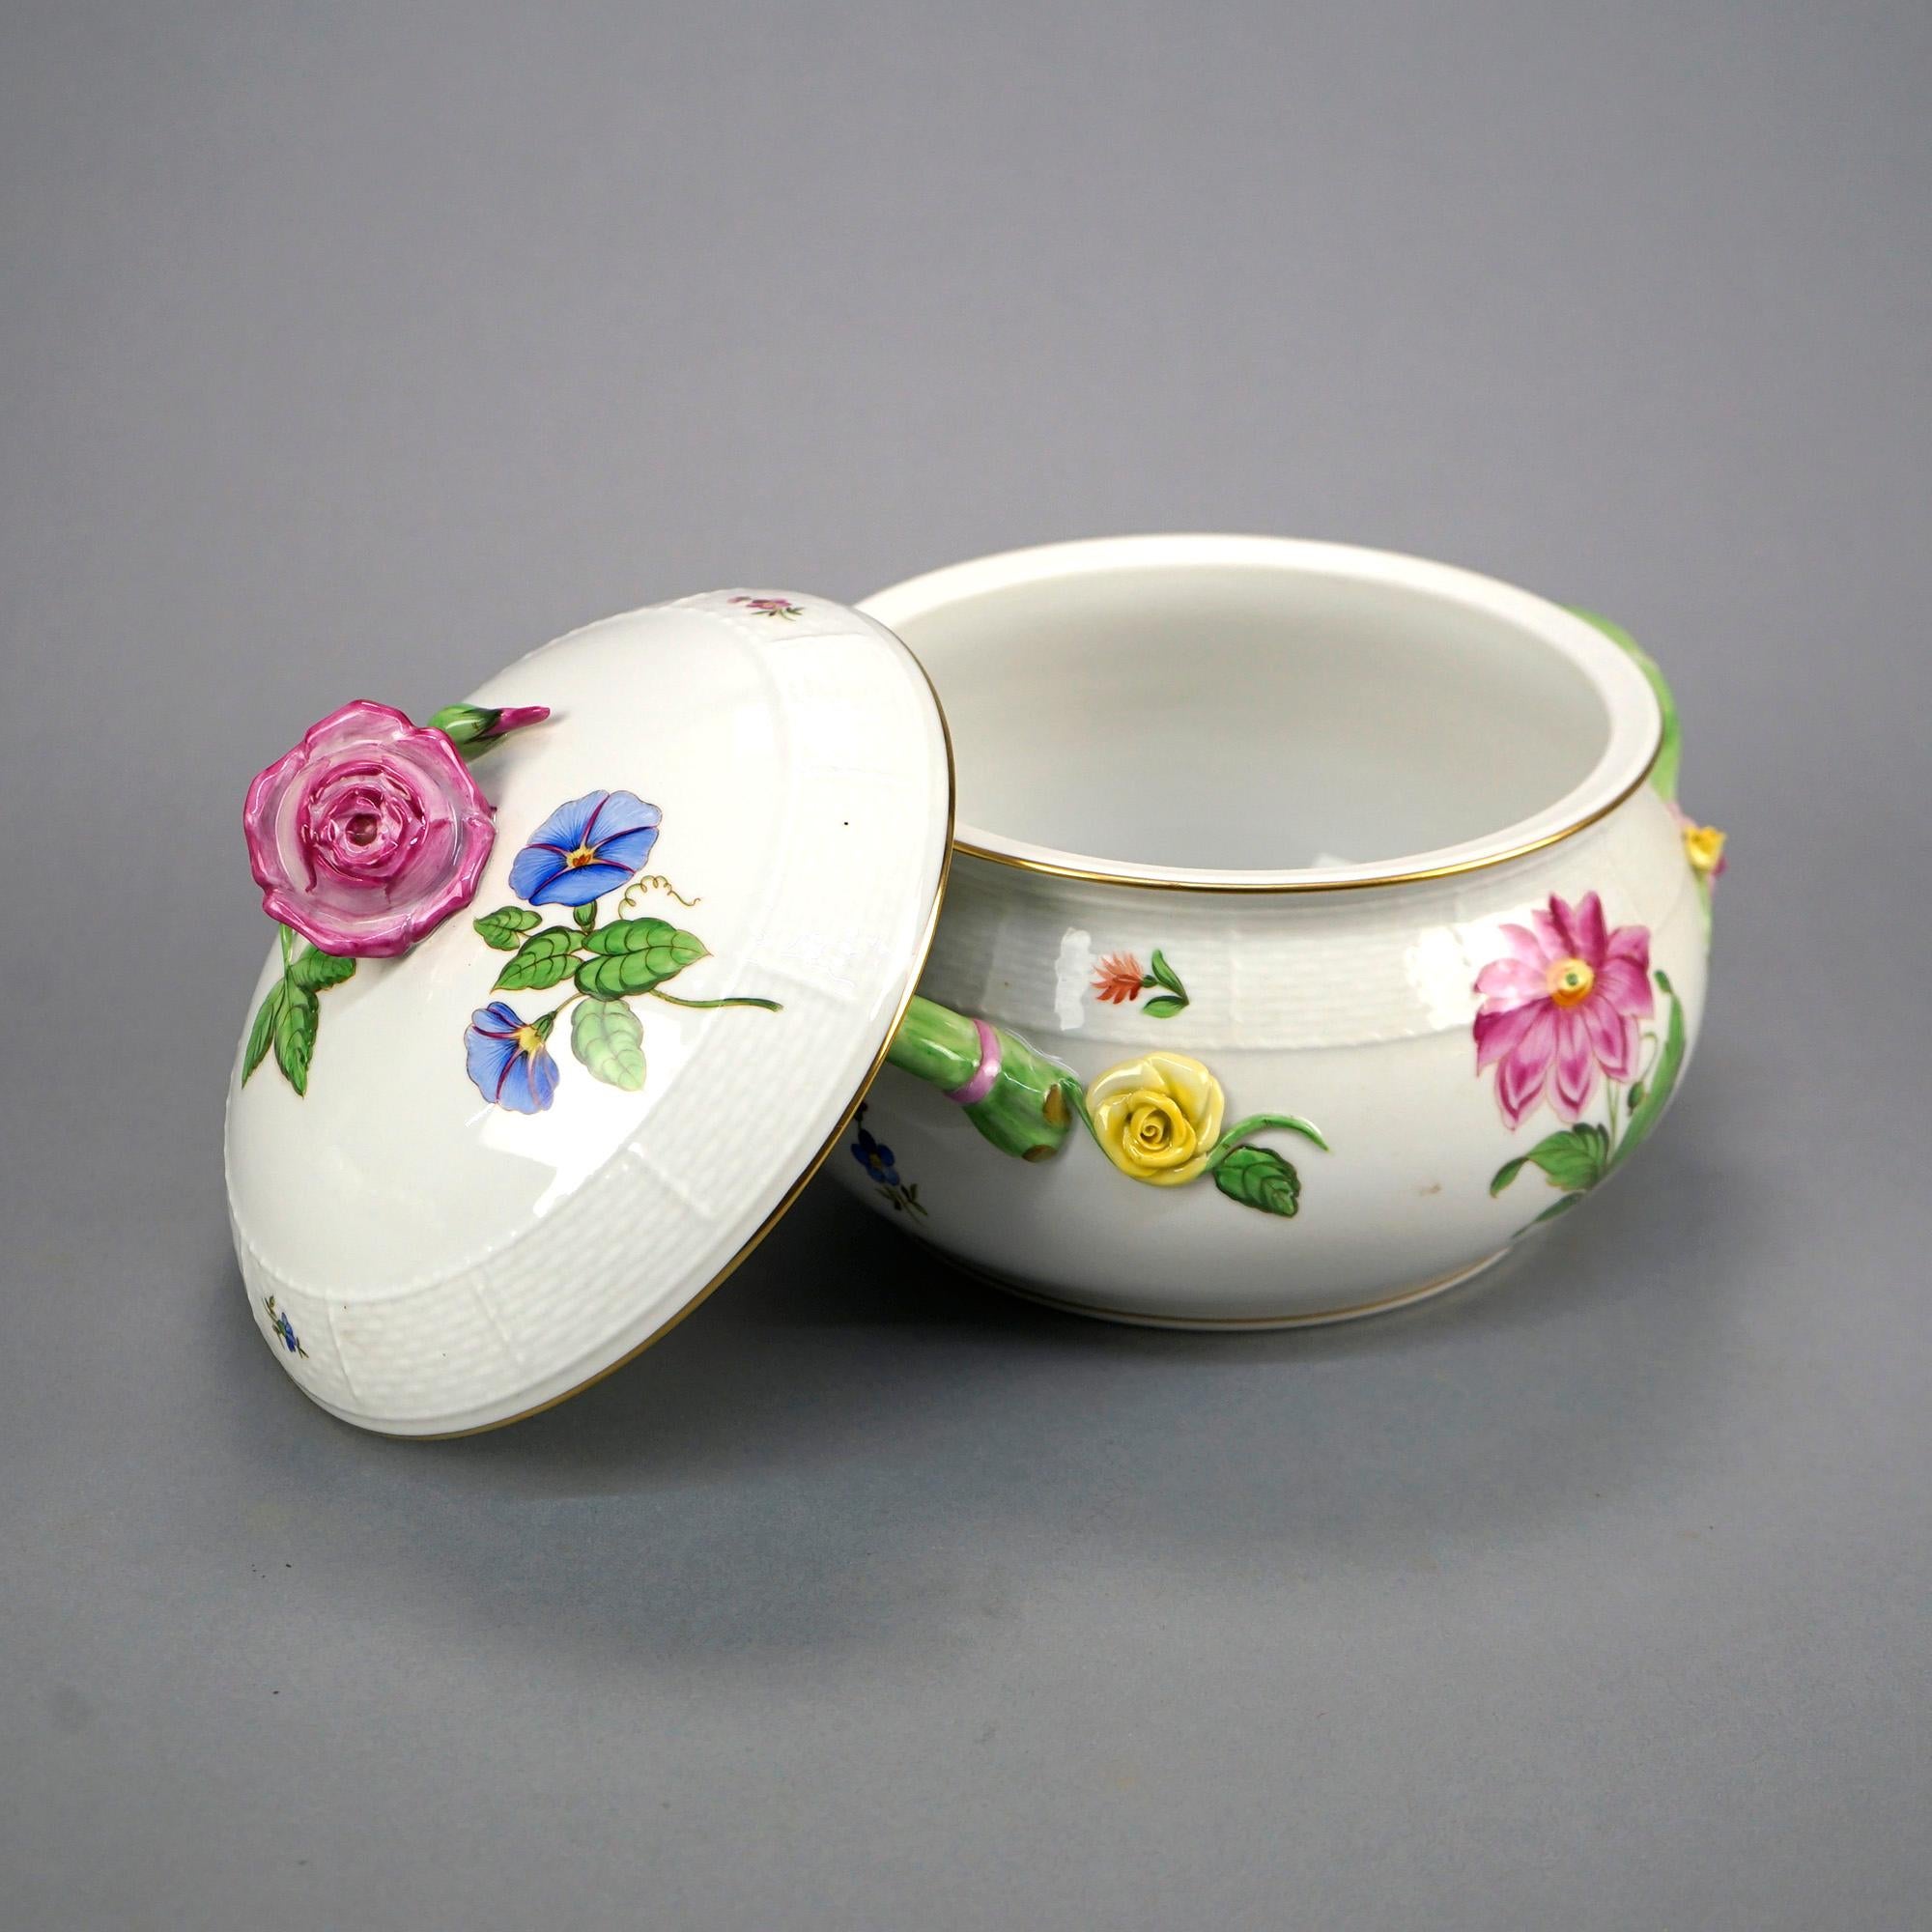 Herend Porcelain Floral Decorated Covered Tureen with Applied Flowers, 20th C 1